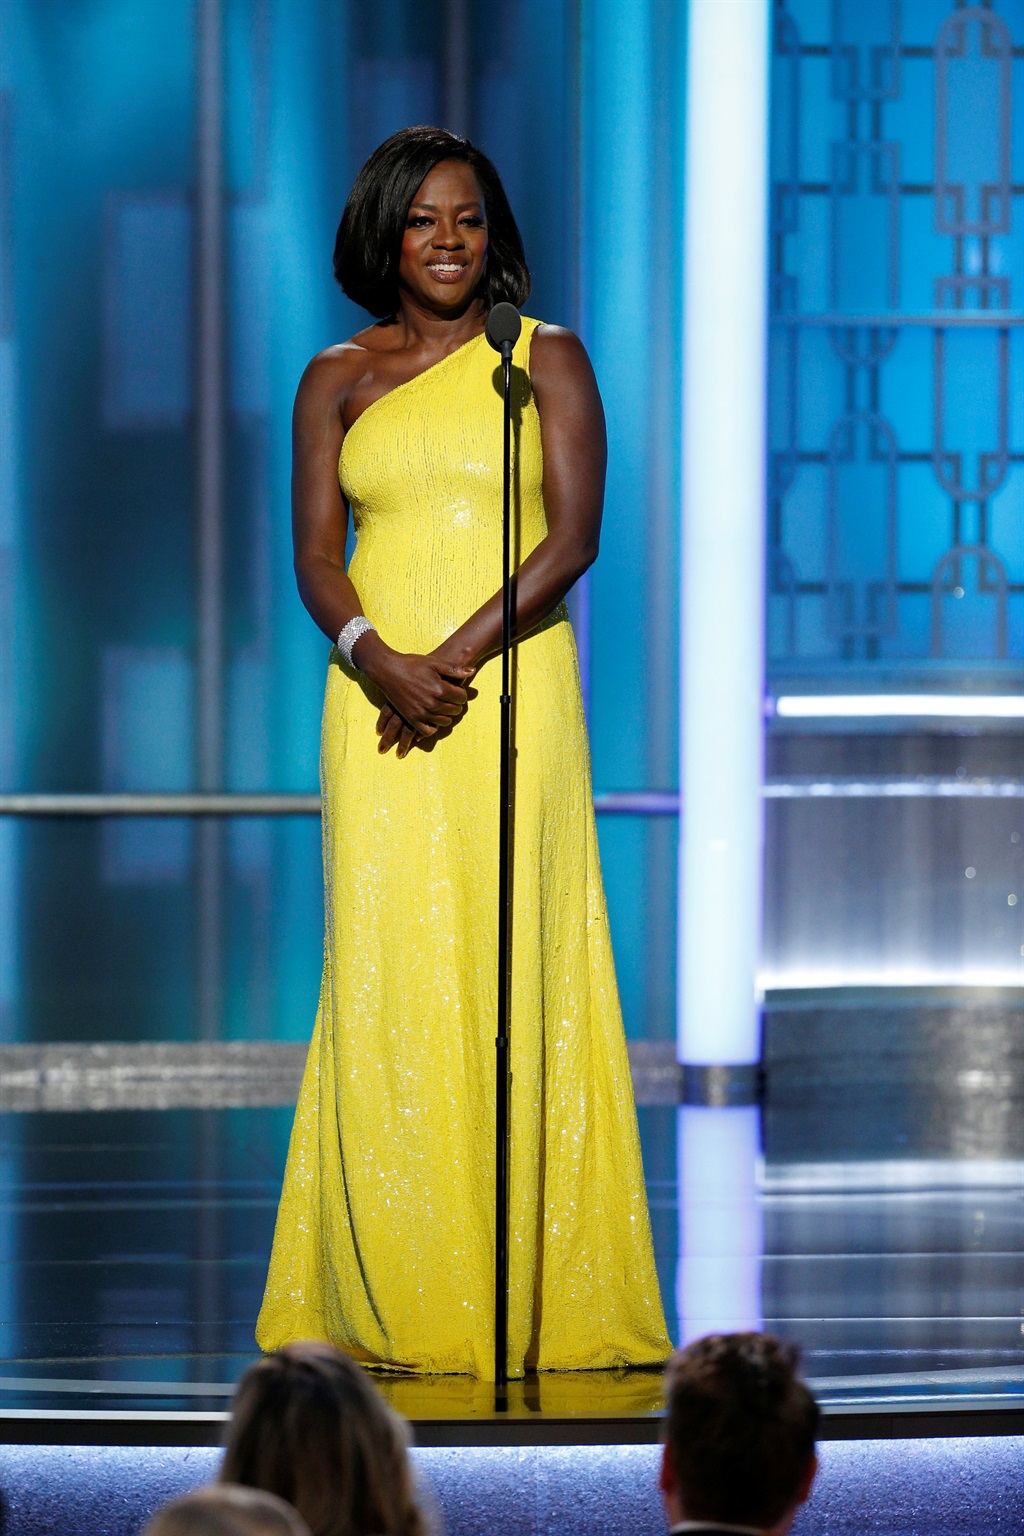 Viola Davis presents during the 74th Annual Golden Globe Awards show in Beverly Hills, California, on January 8 2017. Picture: Paul Drinkwater/Courtesy of NBC/Handout via Reuters 